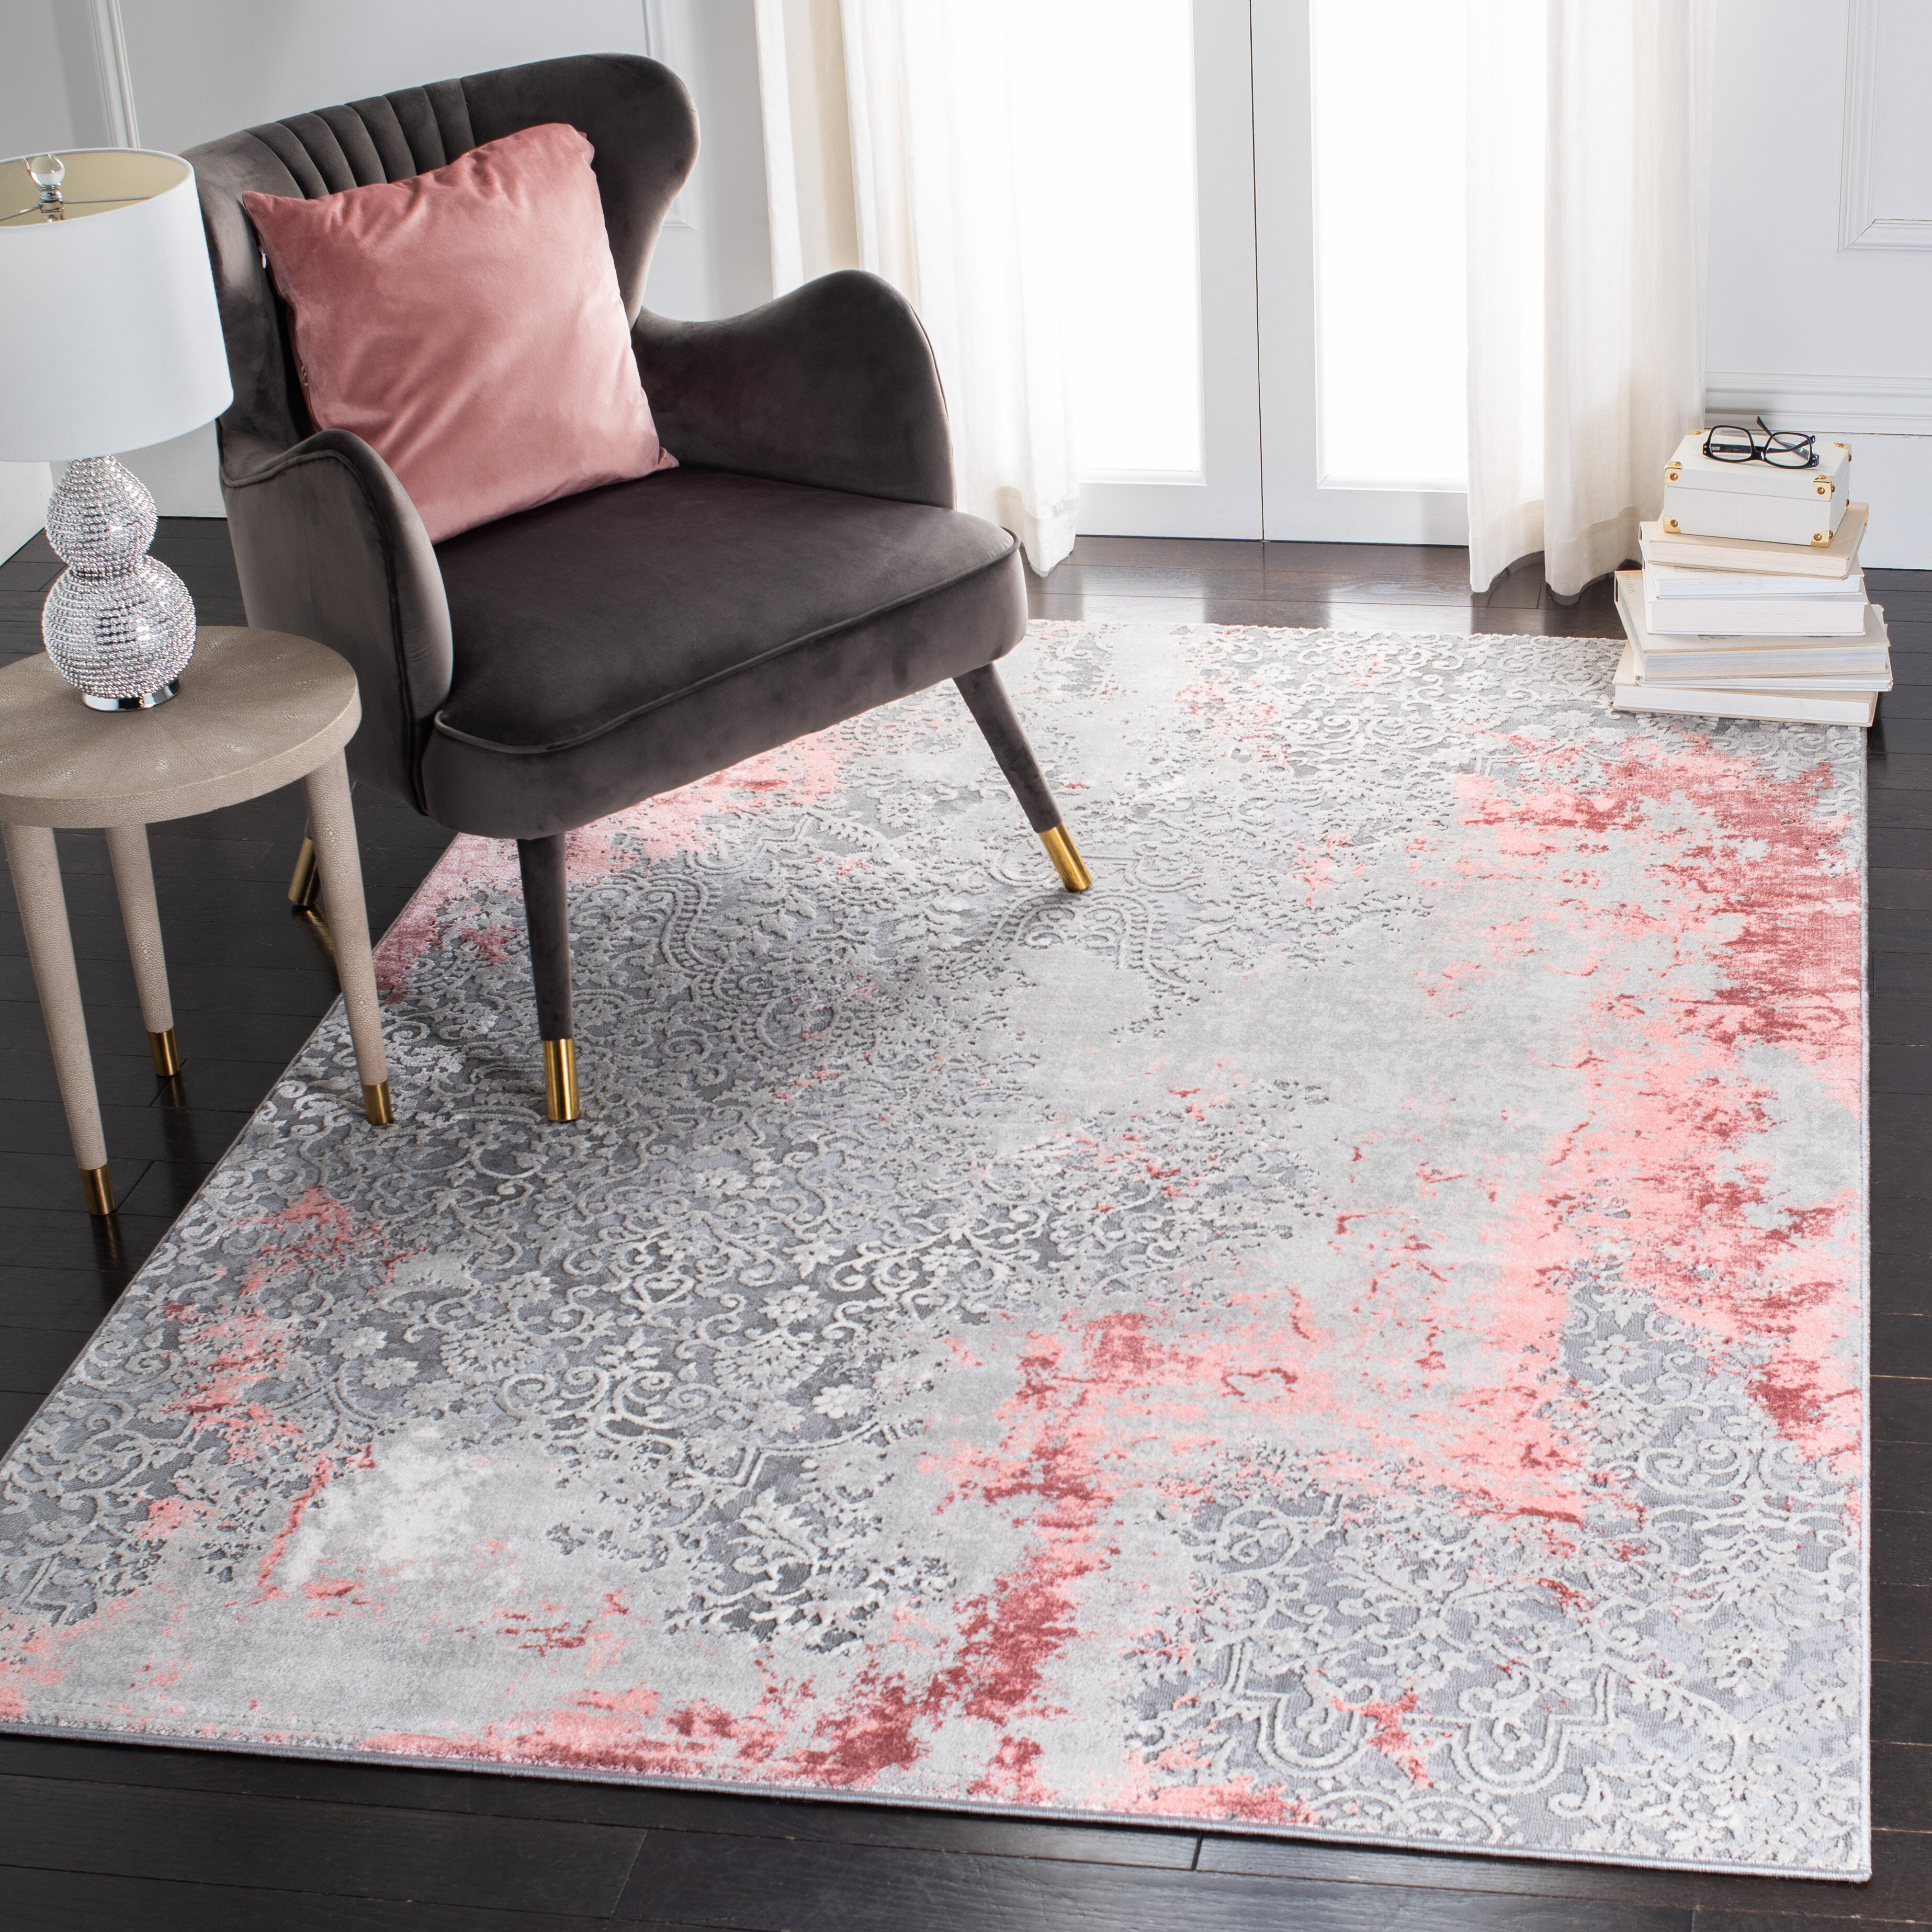 Ernest Oriental Light Gray/Pink Area Rug 17 Stories Rug Size: Rectangle 8' x 10